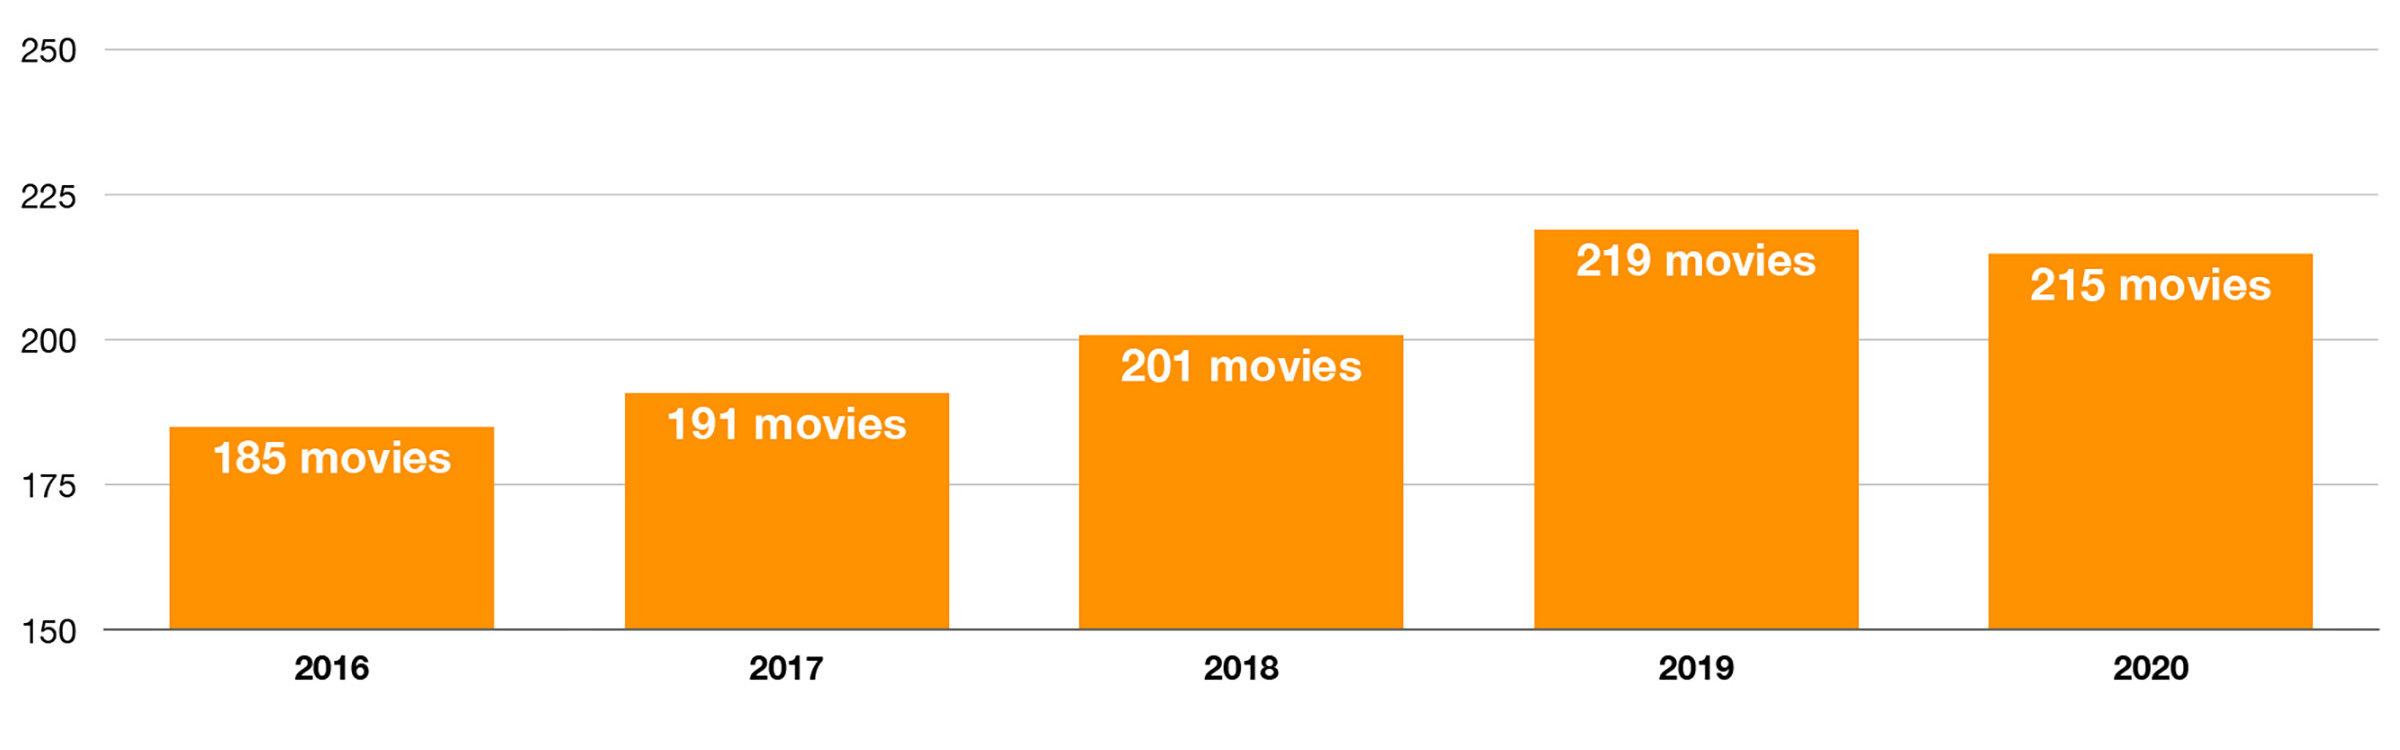 Chart of Yearly Movie Consumption